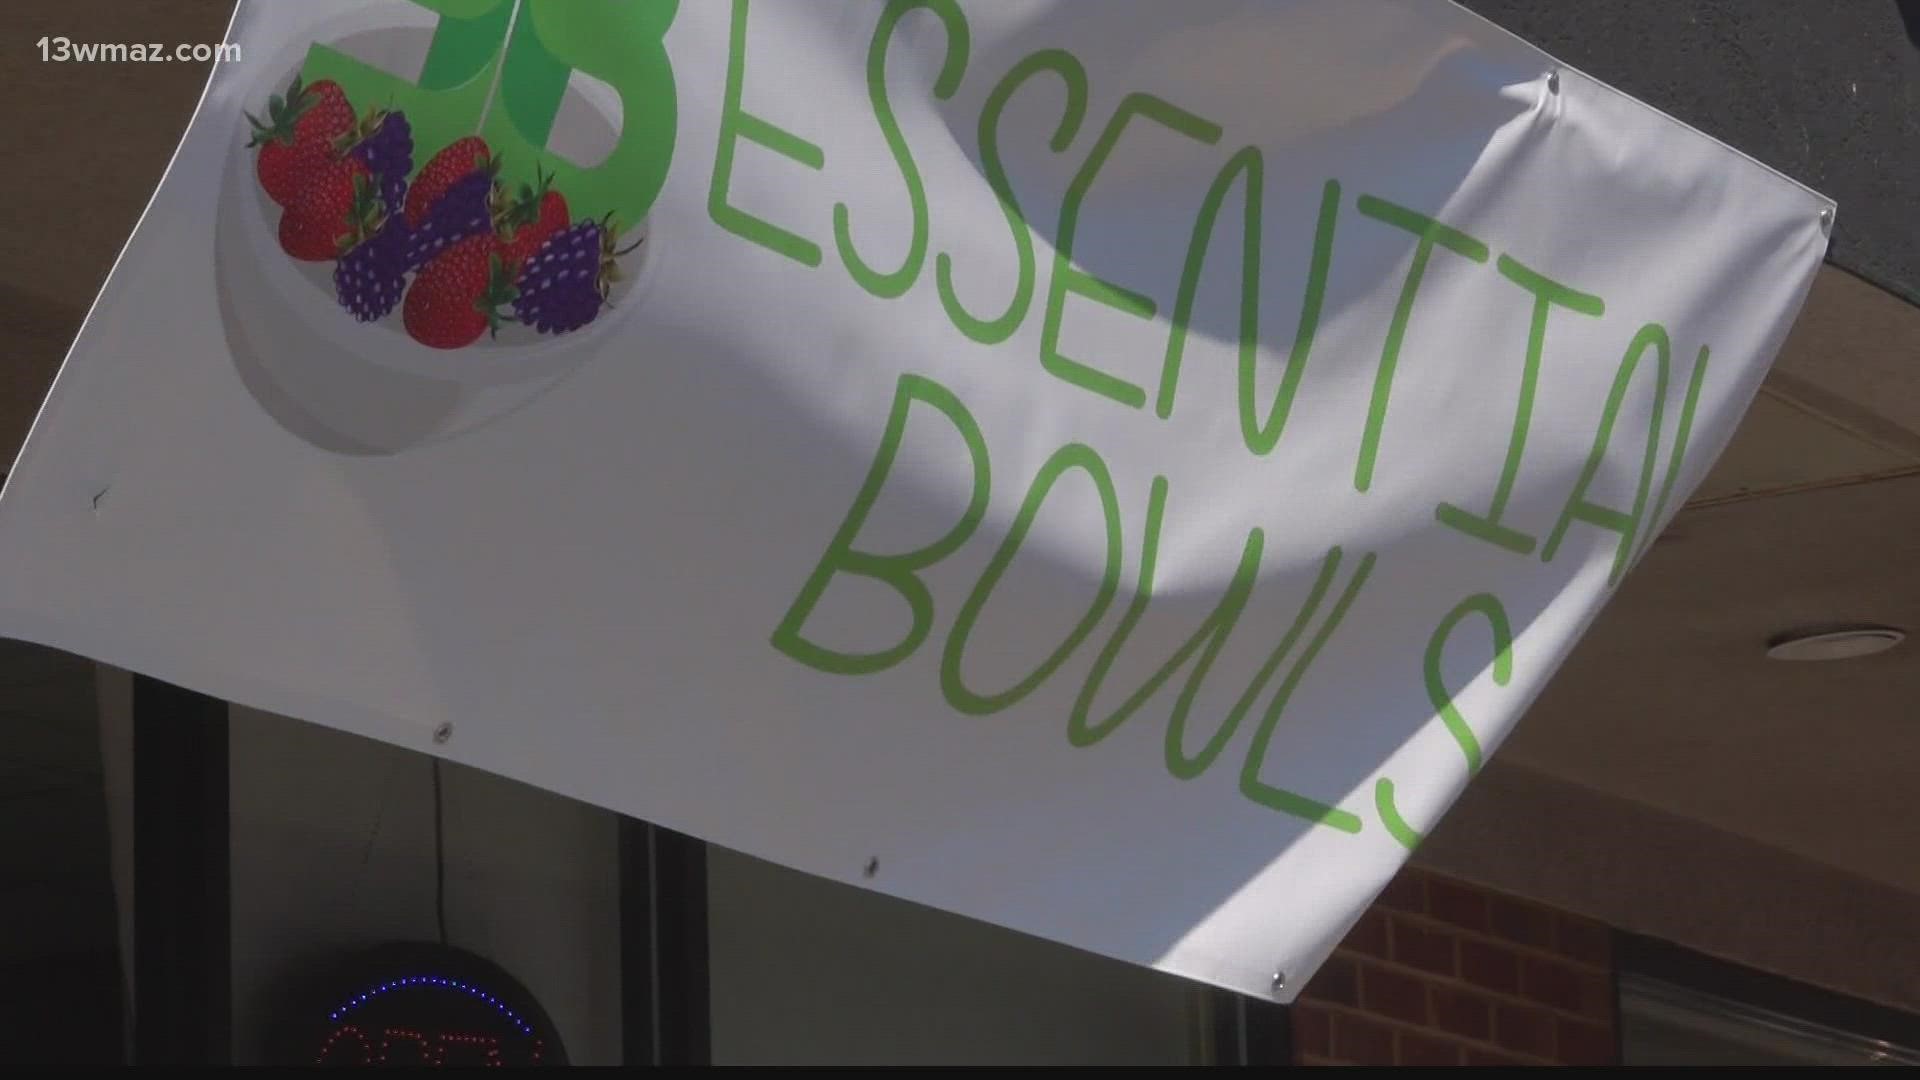 Essential Bowls hasn't been open for long, but they are already making a “smooth” transition into the central Georgia food sphere.